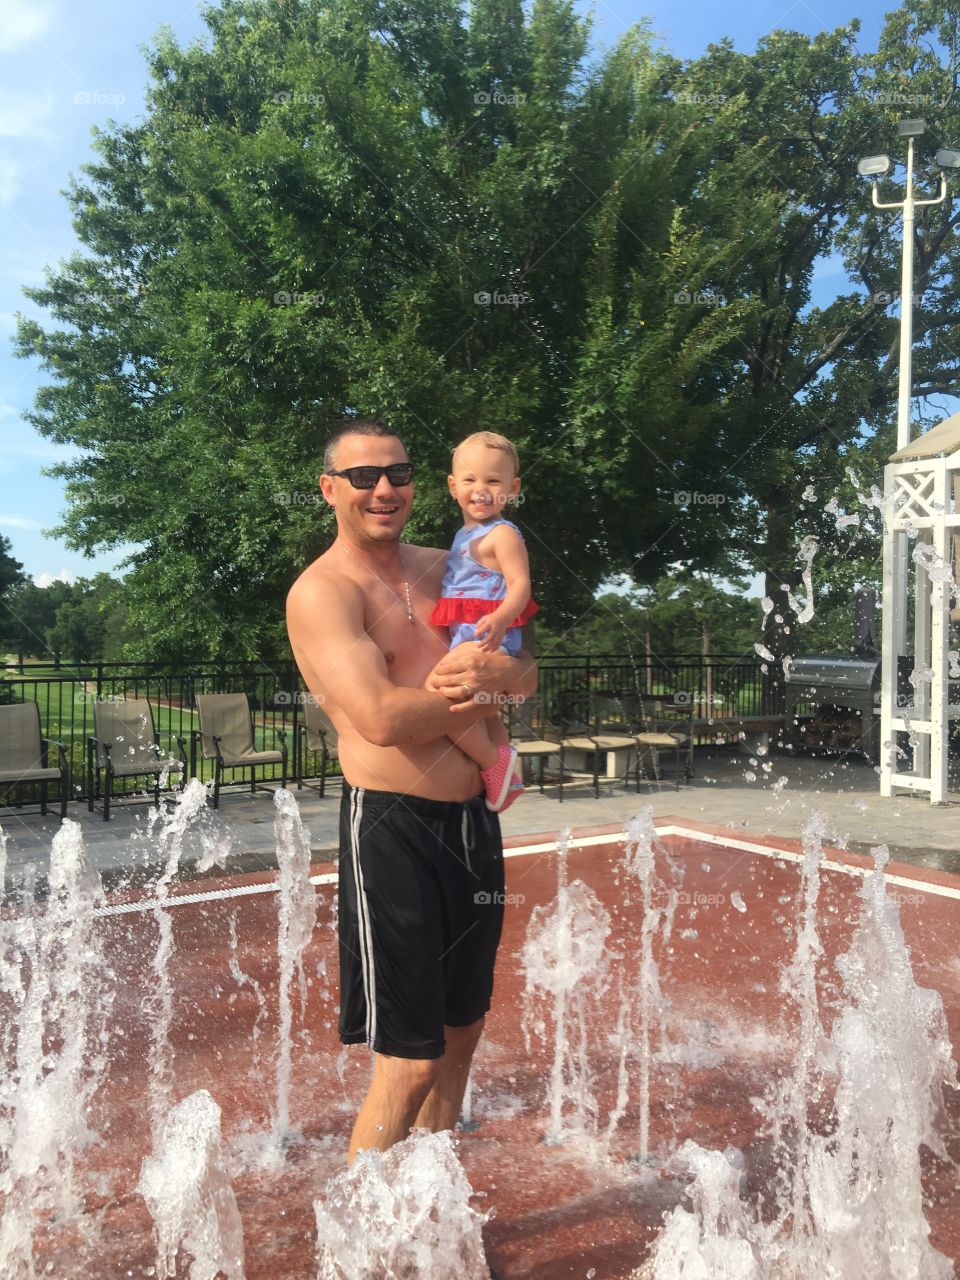 Making a splash with daddy!